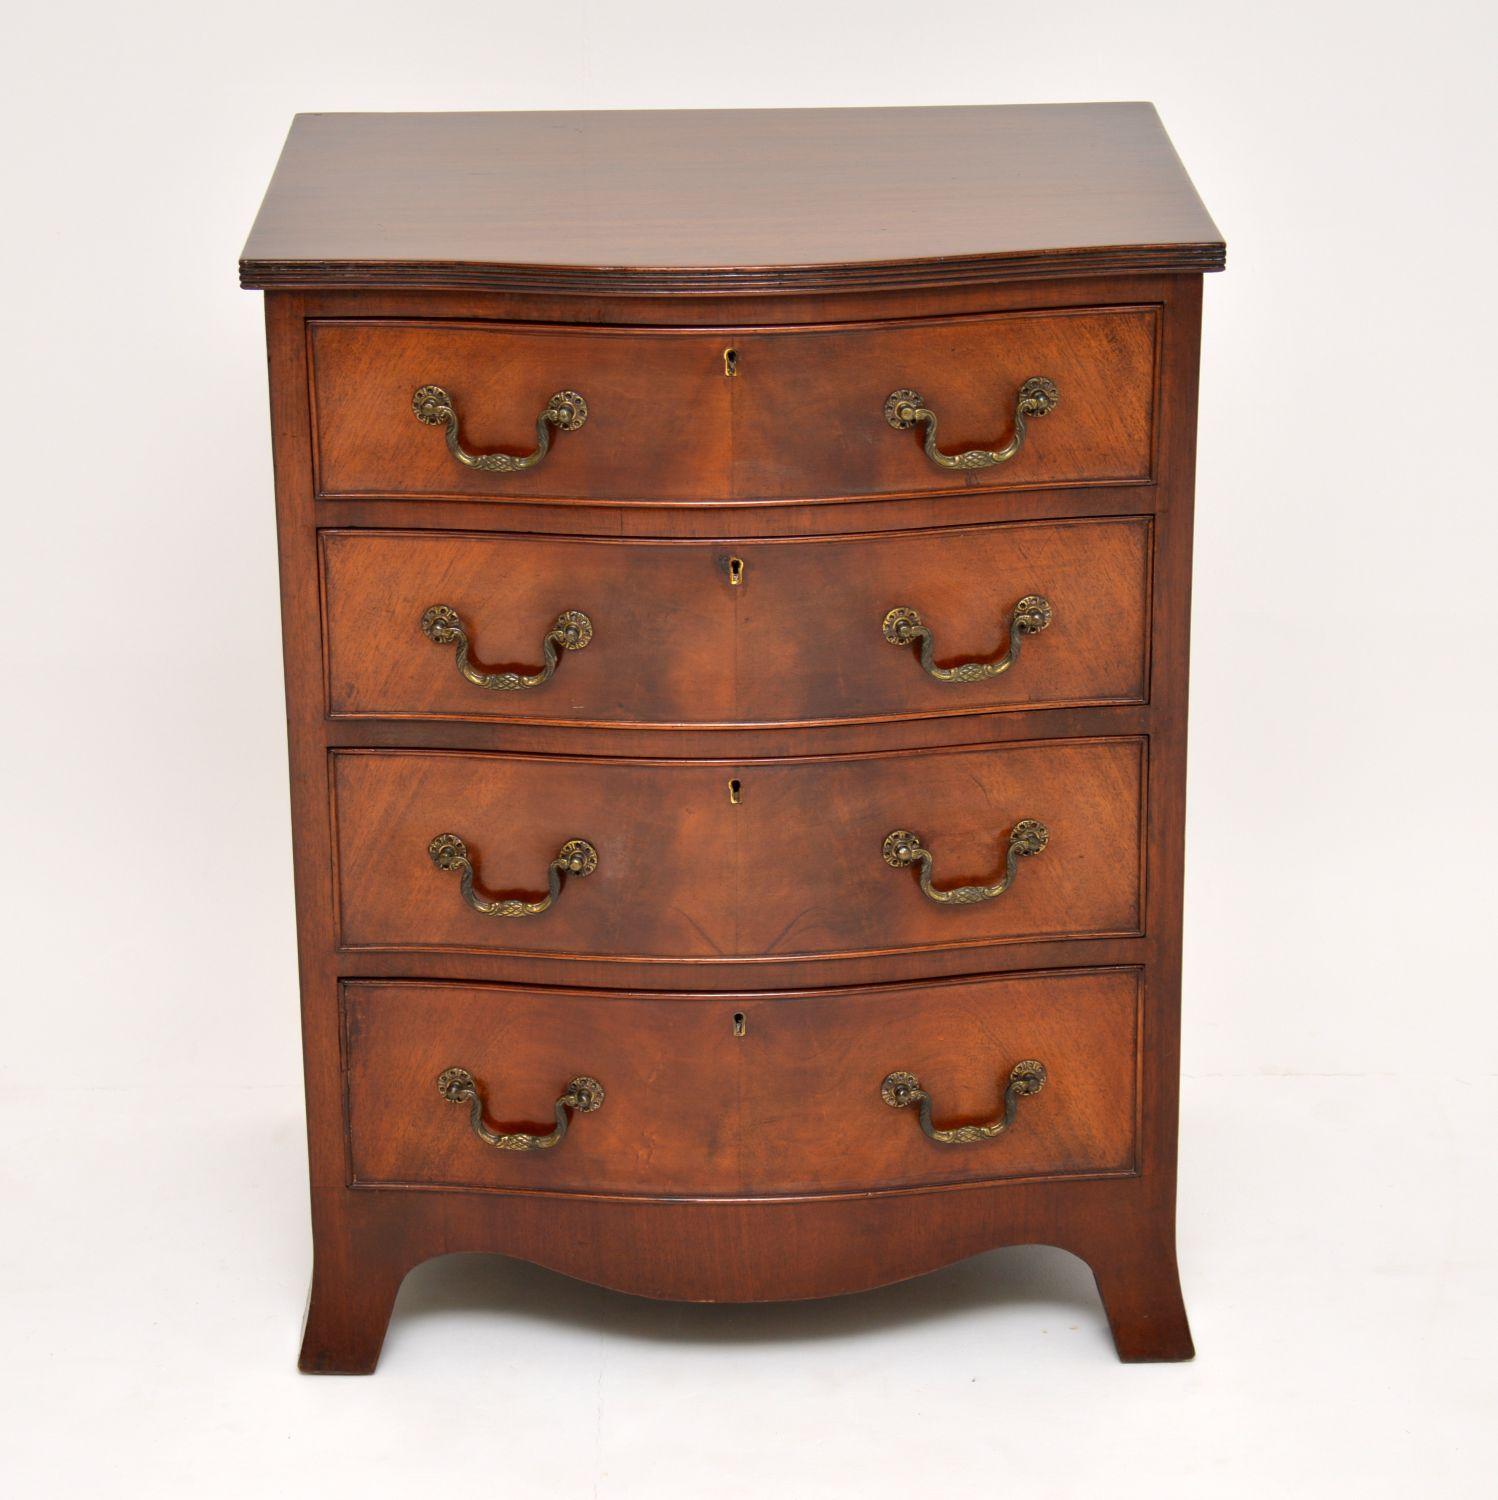 High quality antique mahogany chest of drawers of really nice small proportions.

It’s in excellent original condition and dates from circa 1900-1910 period.

This chest has a serpentine shaped front, a reeded top edge and sits on splayed feet.